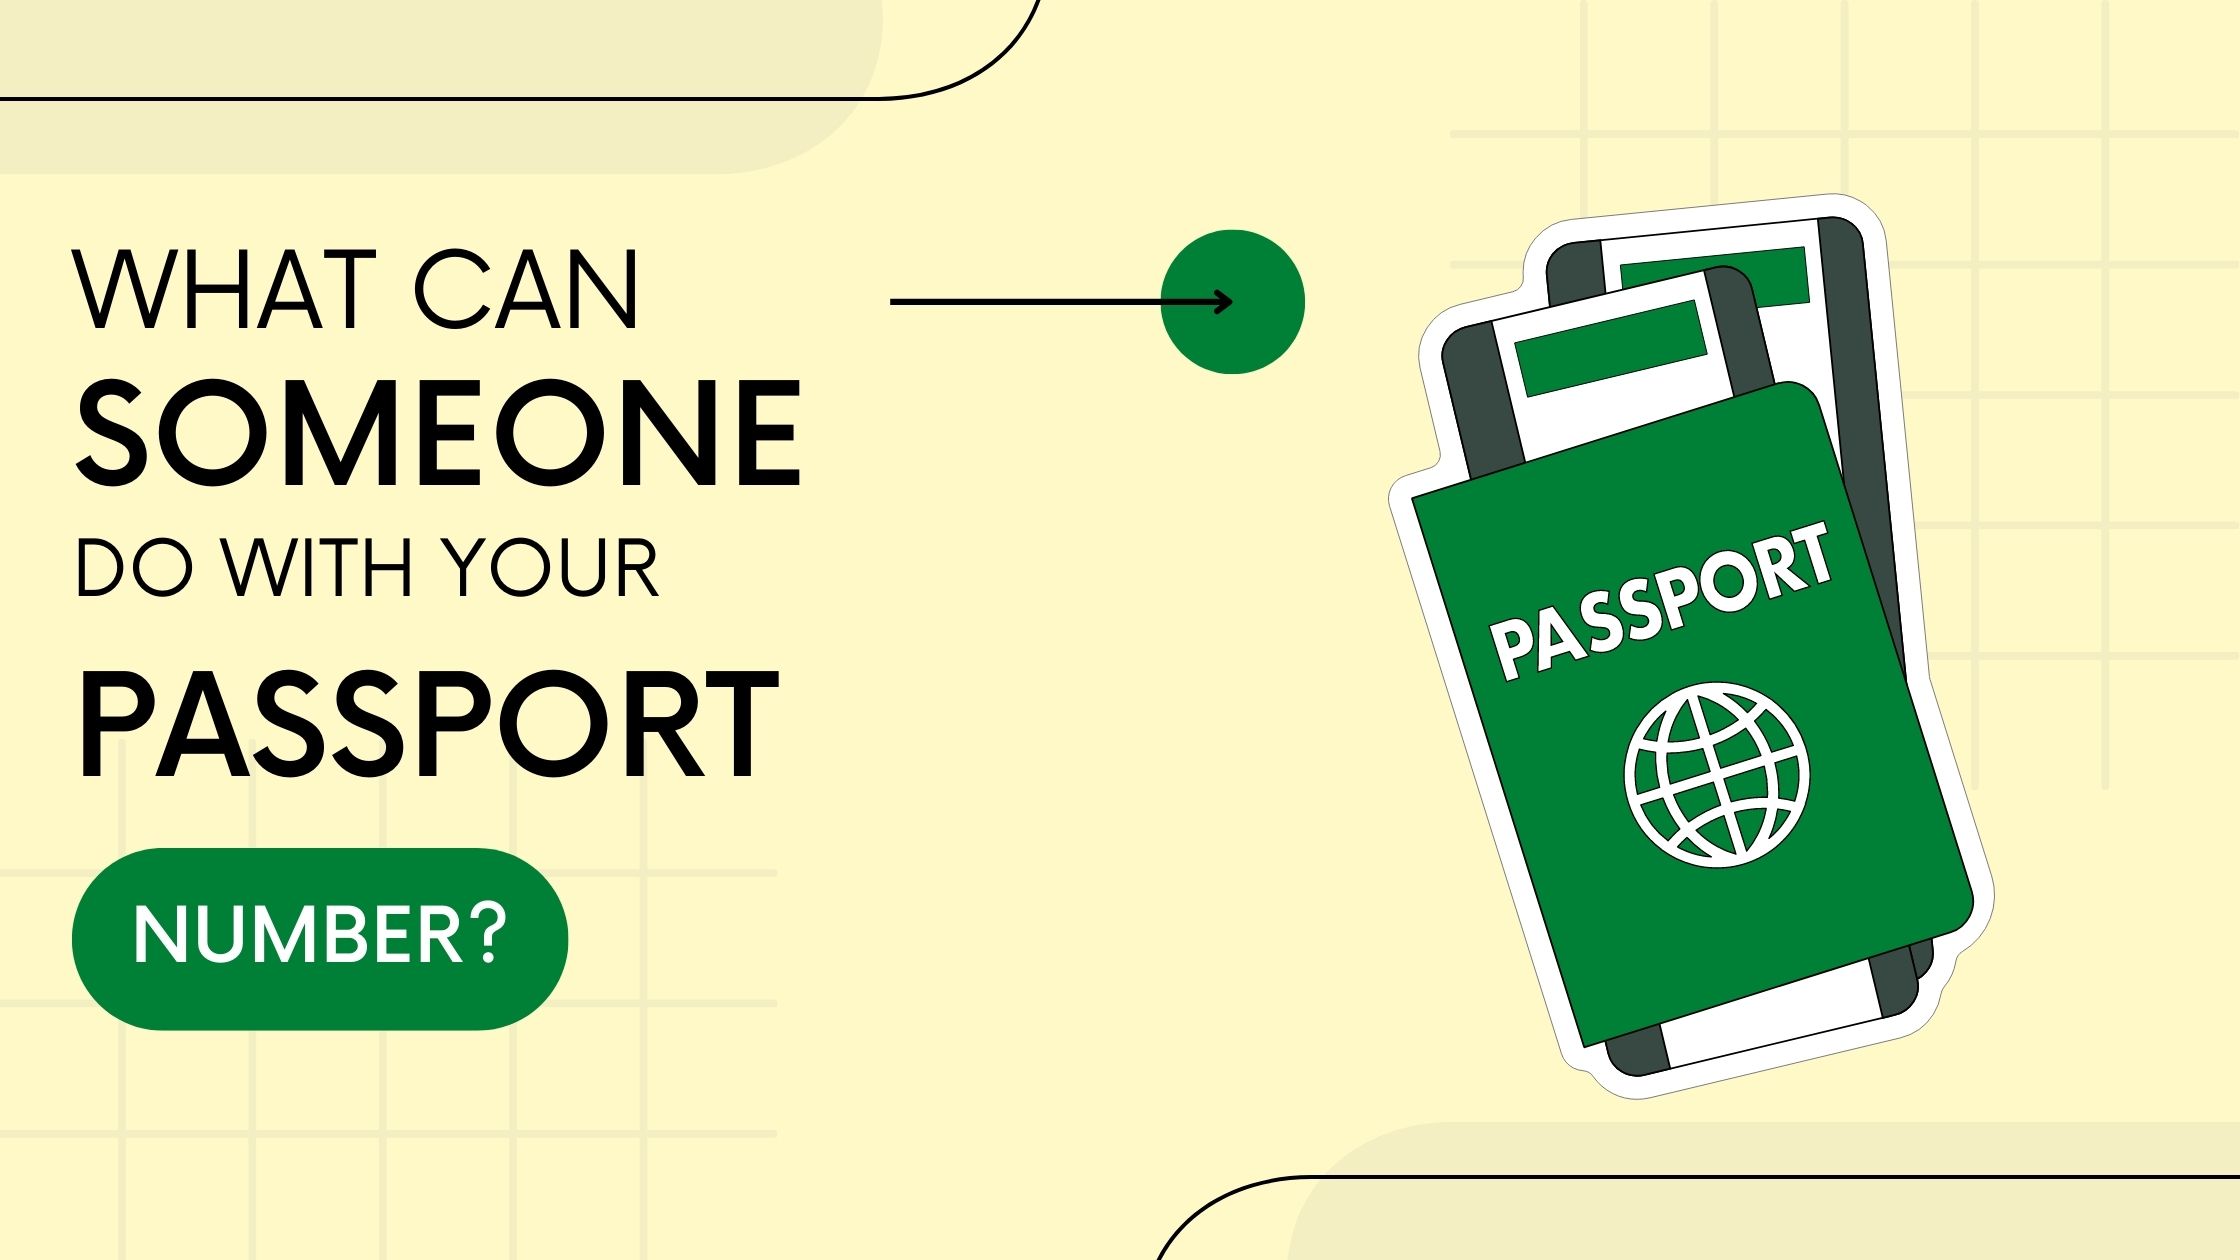 What Can Someone Do With Your Passport Number?